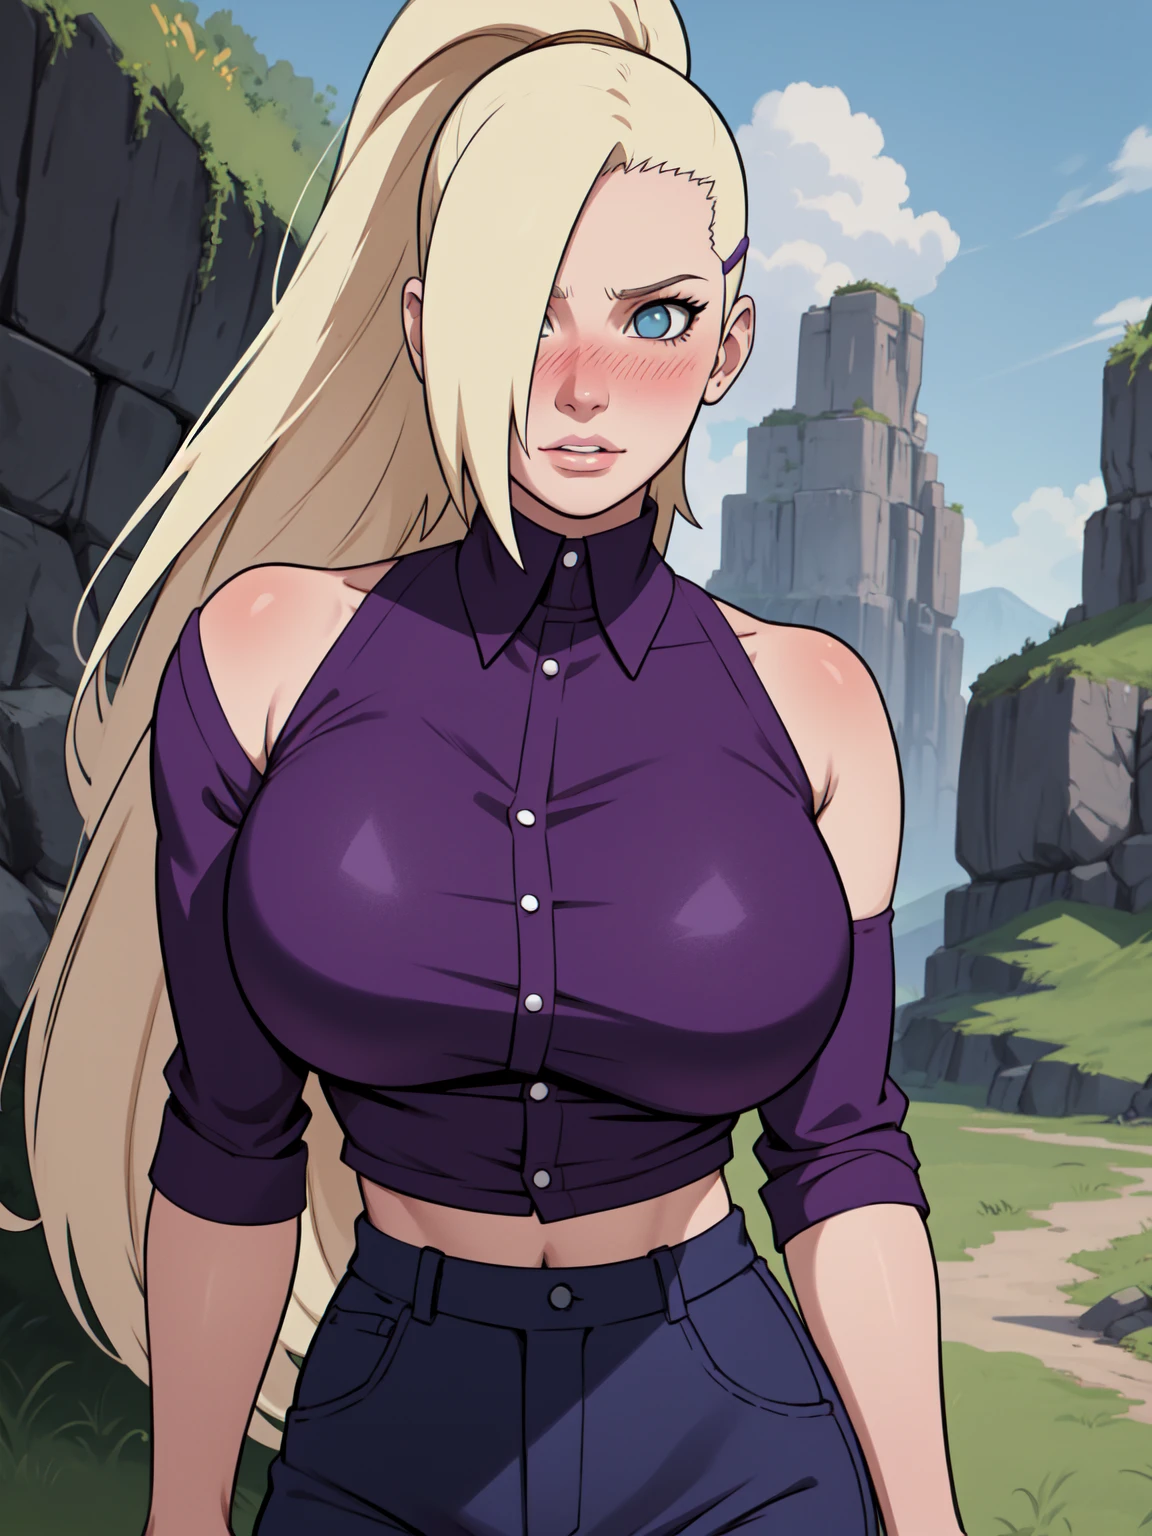 {-erro_de_anatomia:1.0} estilo anime, Masterpiece, absurdities, Yamanaka Ino\(Naruto\), 1girl Solo, woman, Perfect composition, Detailed lips, Beautiful face, body proportion, Blush, Long blonde hair, blue eyes, purple blouse, purple pant, Soft gauze, Super realistic, Detailed, photo shoot, Realistic faces and bodies, masterpiece, best quality, best illustration, hyper detailed, 1 woman, solo, glamorous, blushing, upper body, fighting, on nature, look at the view, dimanic poses, 